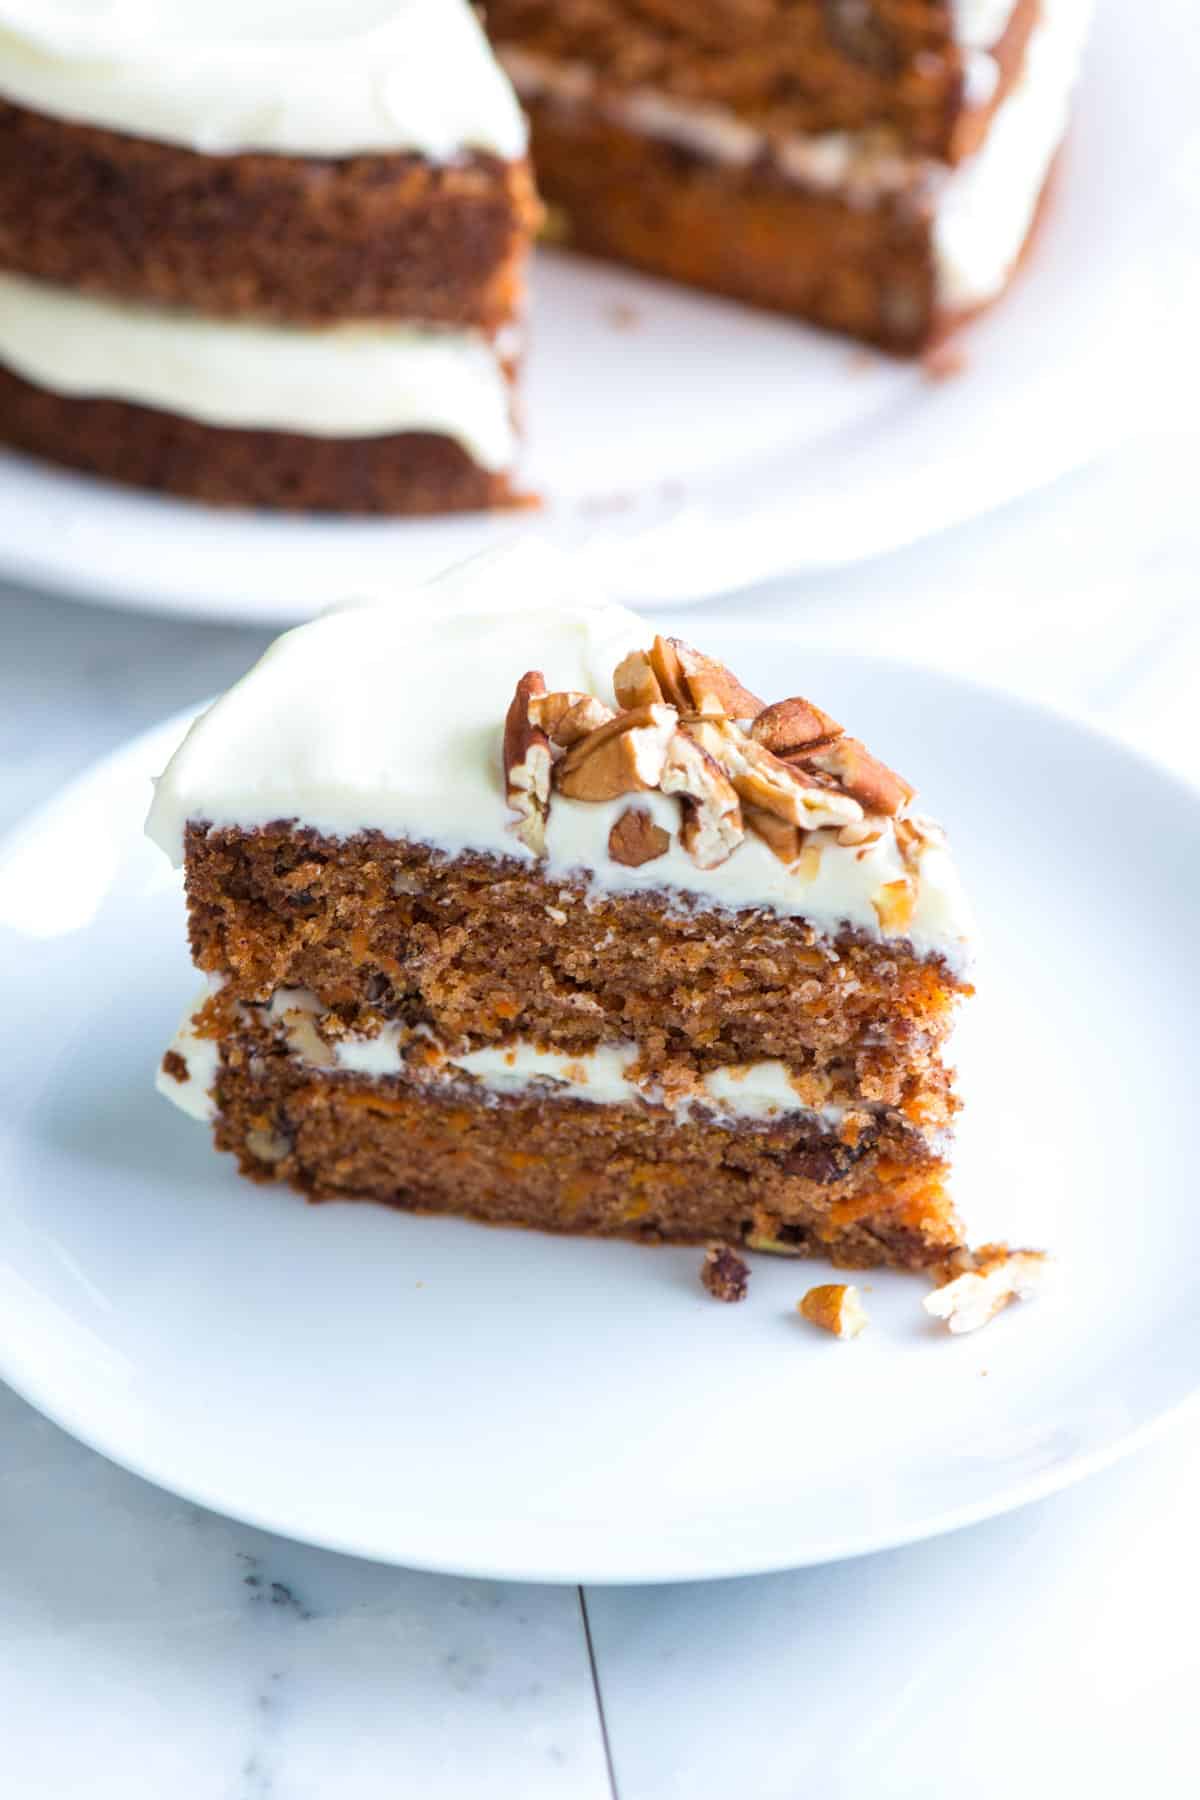 Slice of homemade carrot cake with cream cheese frosting.